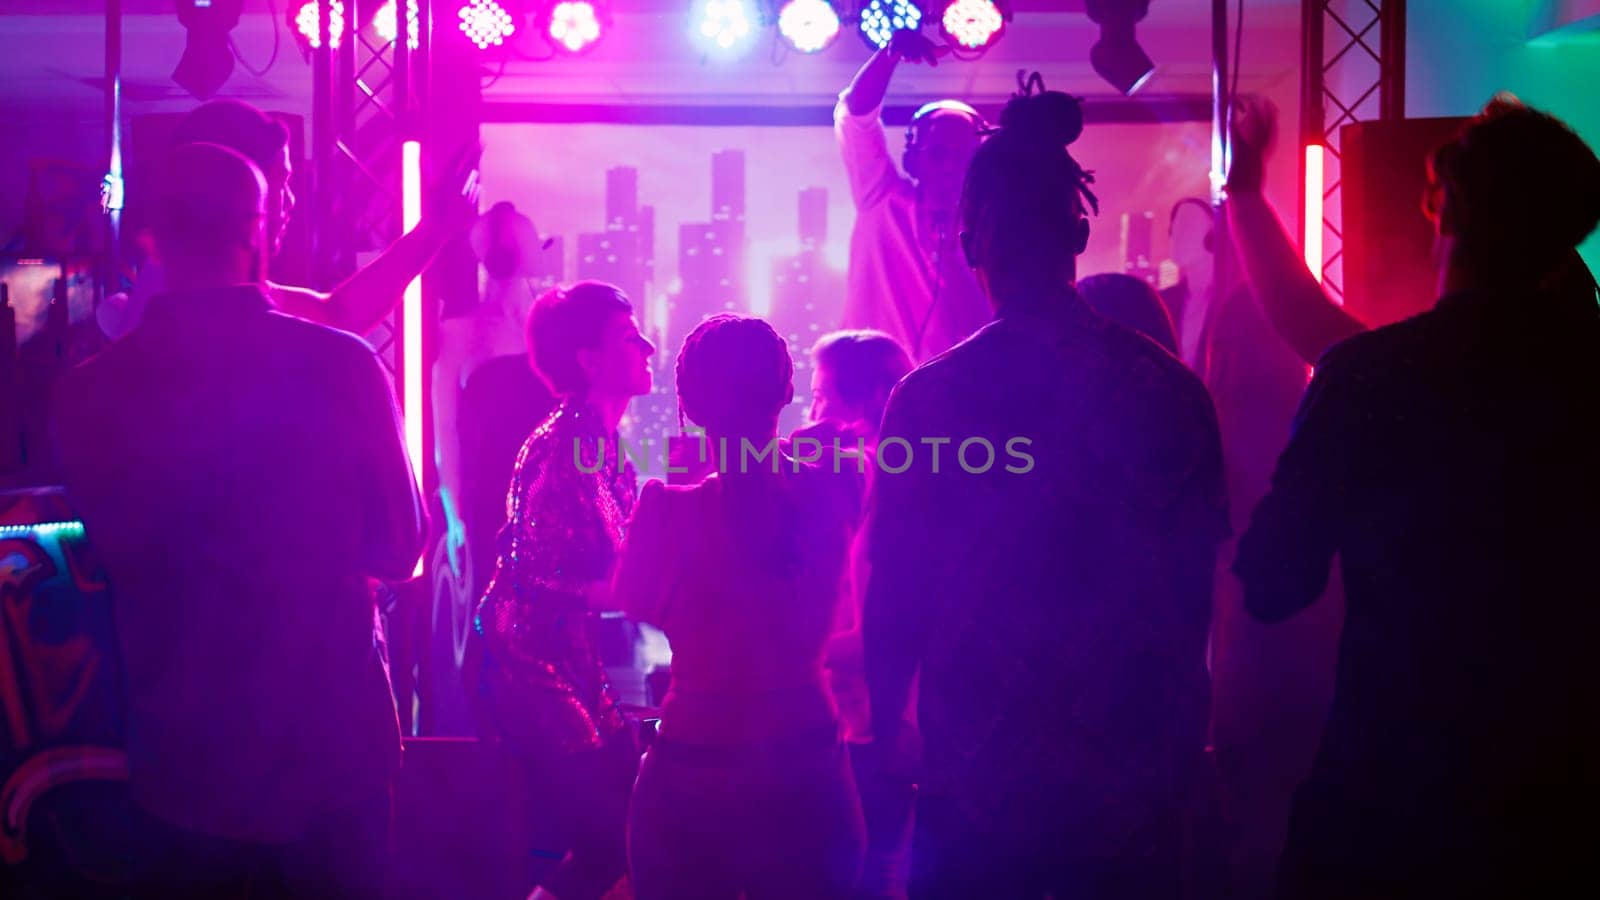 Persons at club interrupted by police lights, funky people stopping the music after seeing law enforcement officers. Group of friends running away from dance floor and nightclub. Handheld shot.